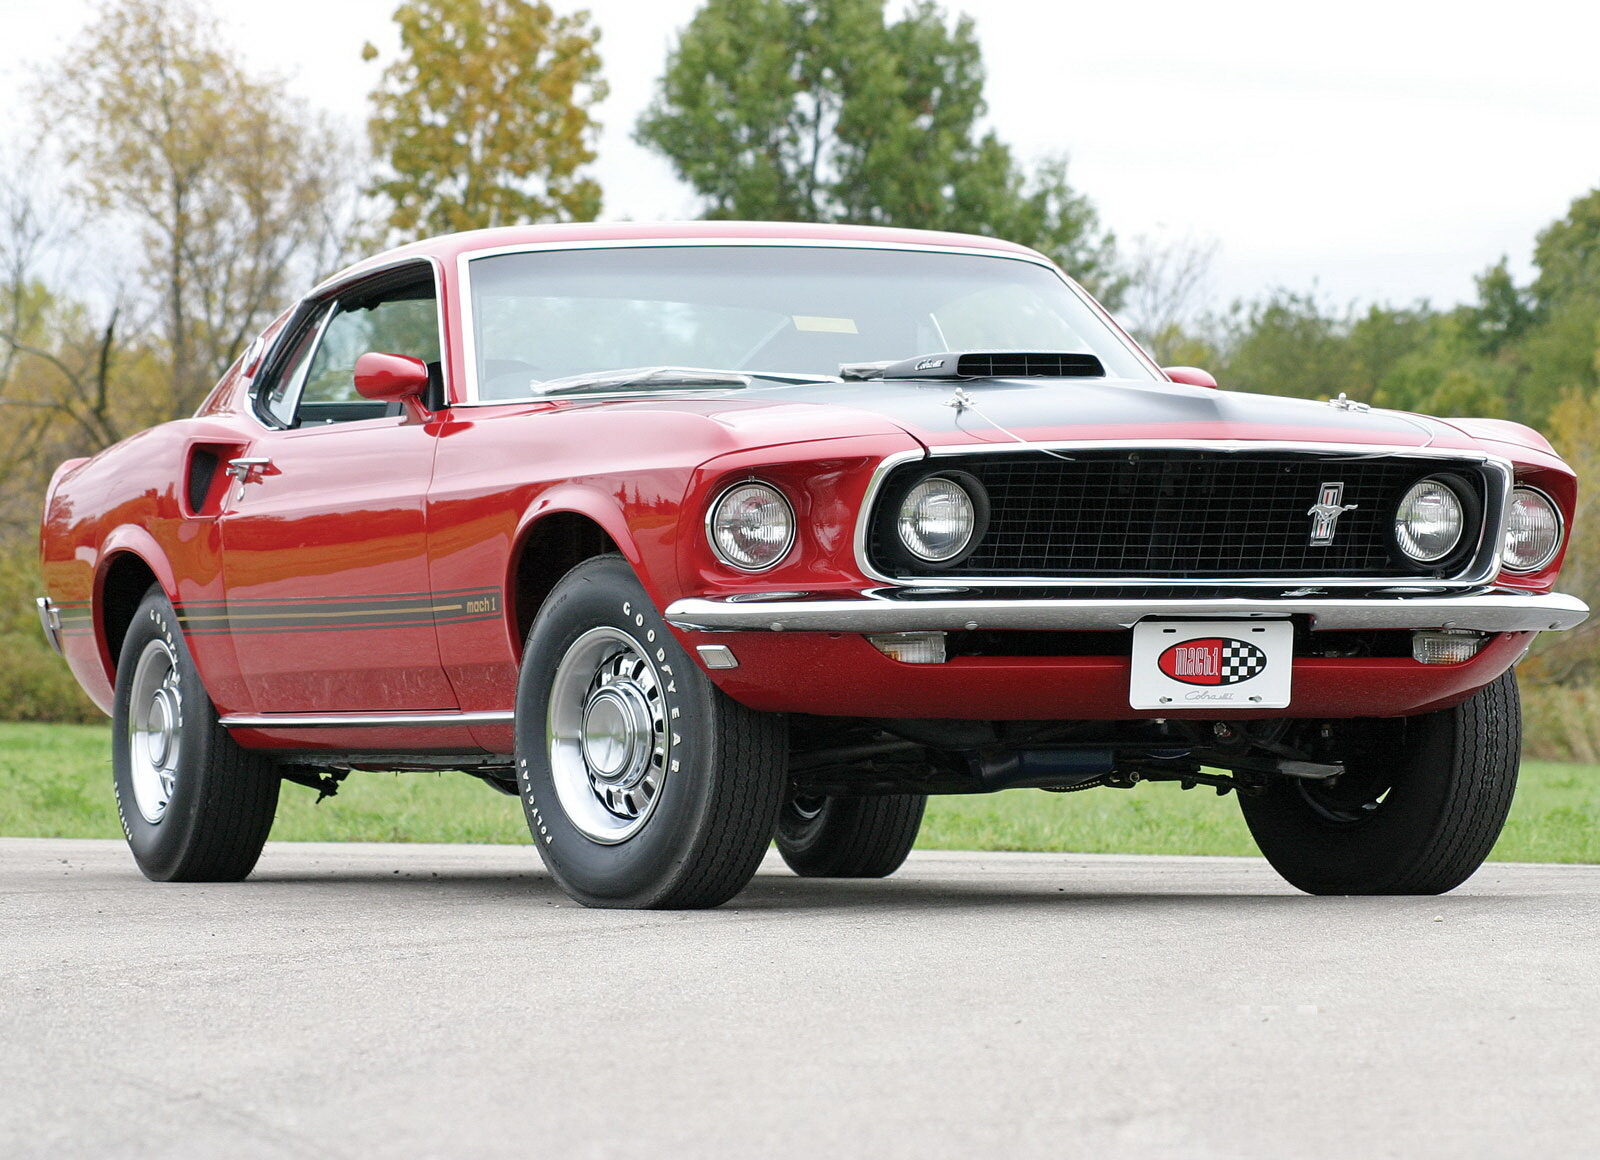 1969 Ford Mustang Mach 1 428 Super Cobra Jet, ford, Ford Mustang